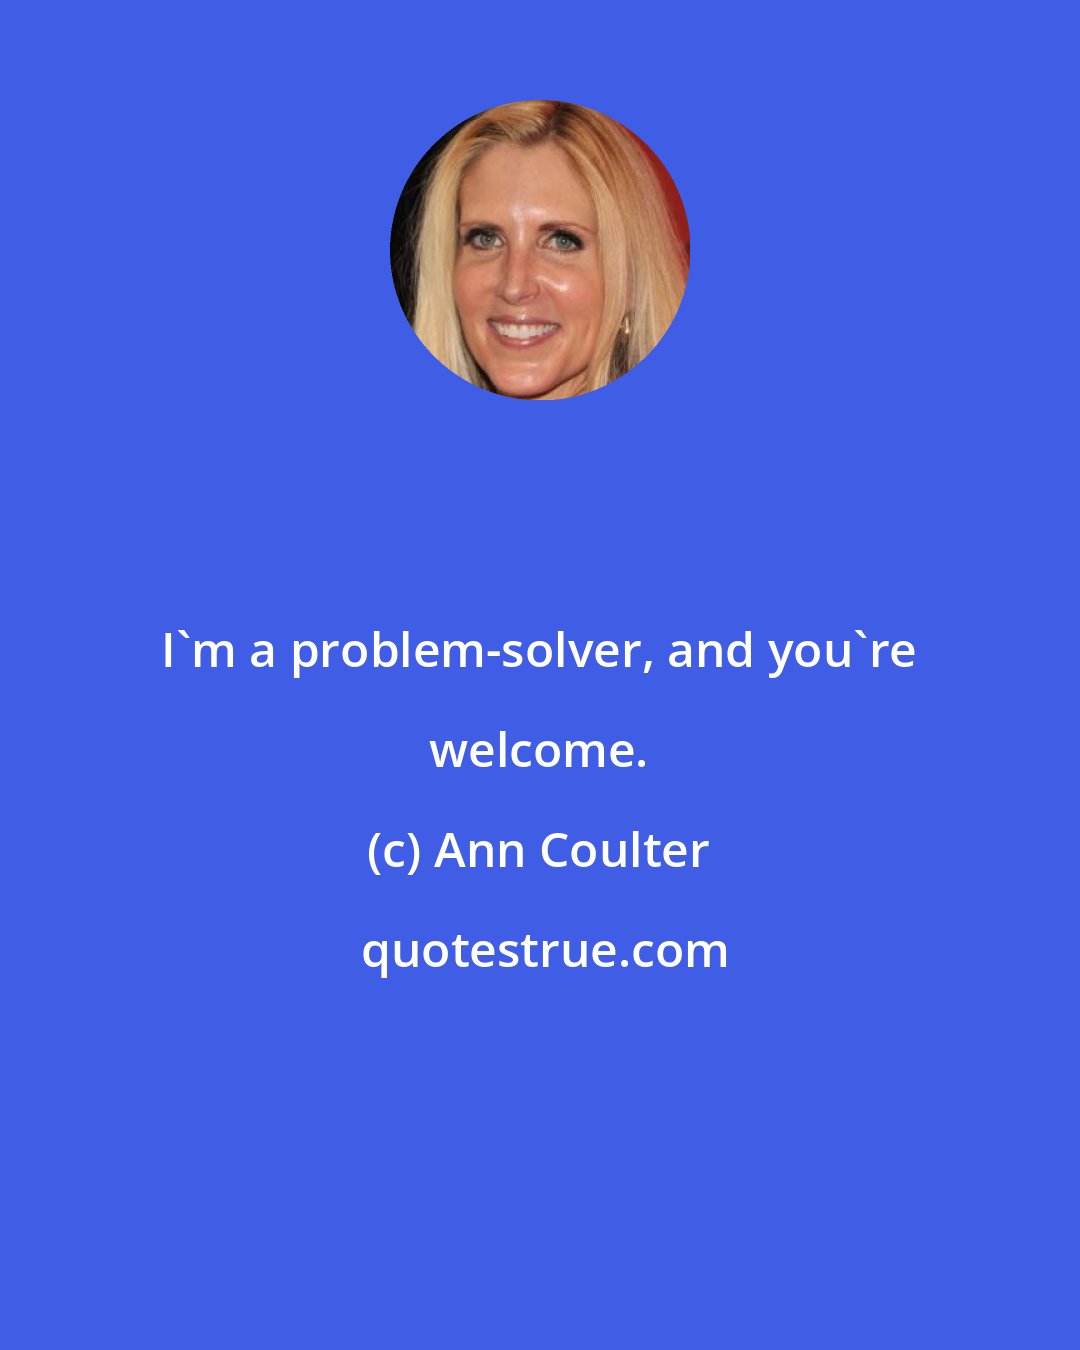 Ann Coulter: I'm a problem-solver, and you're welcome.